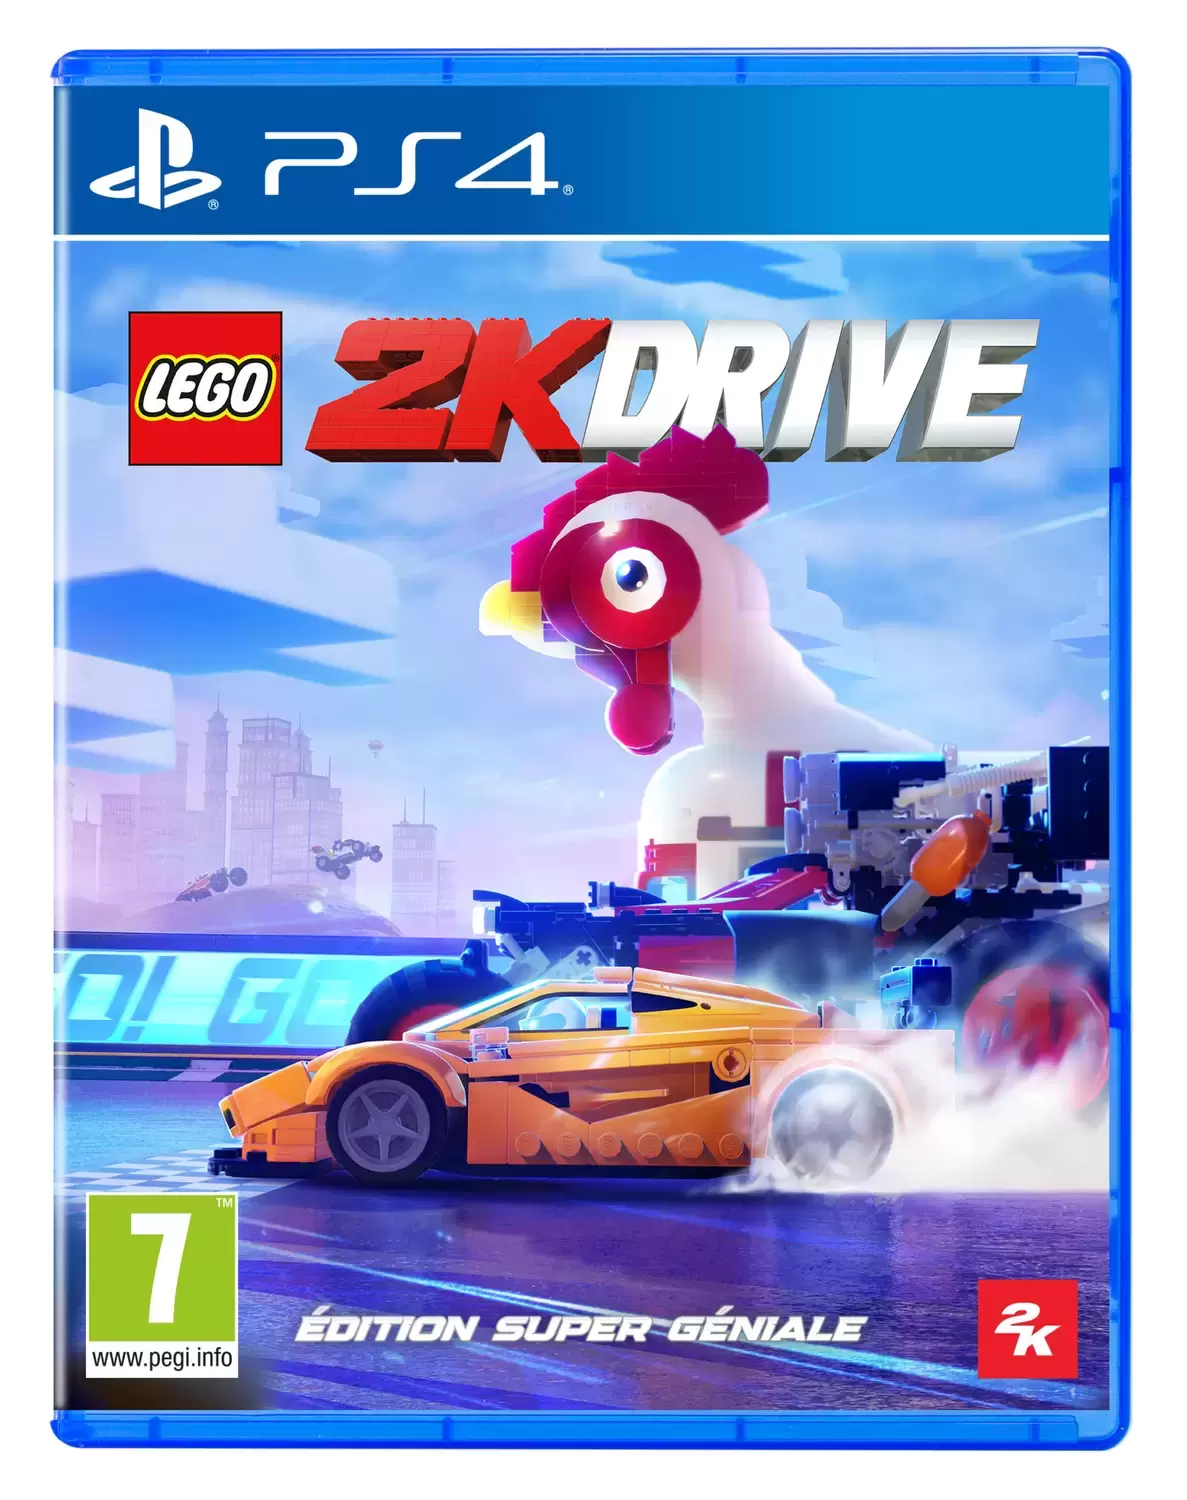 PS4 Games - Lego 2K Drive Awesome Edition